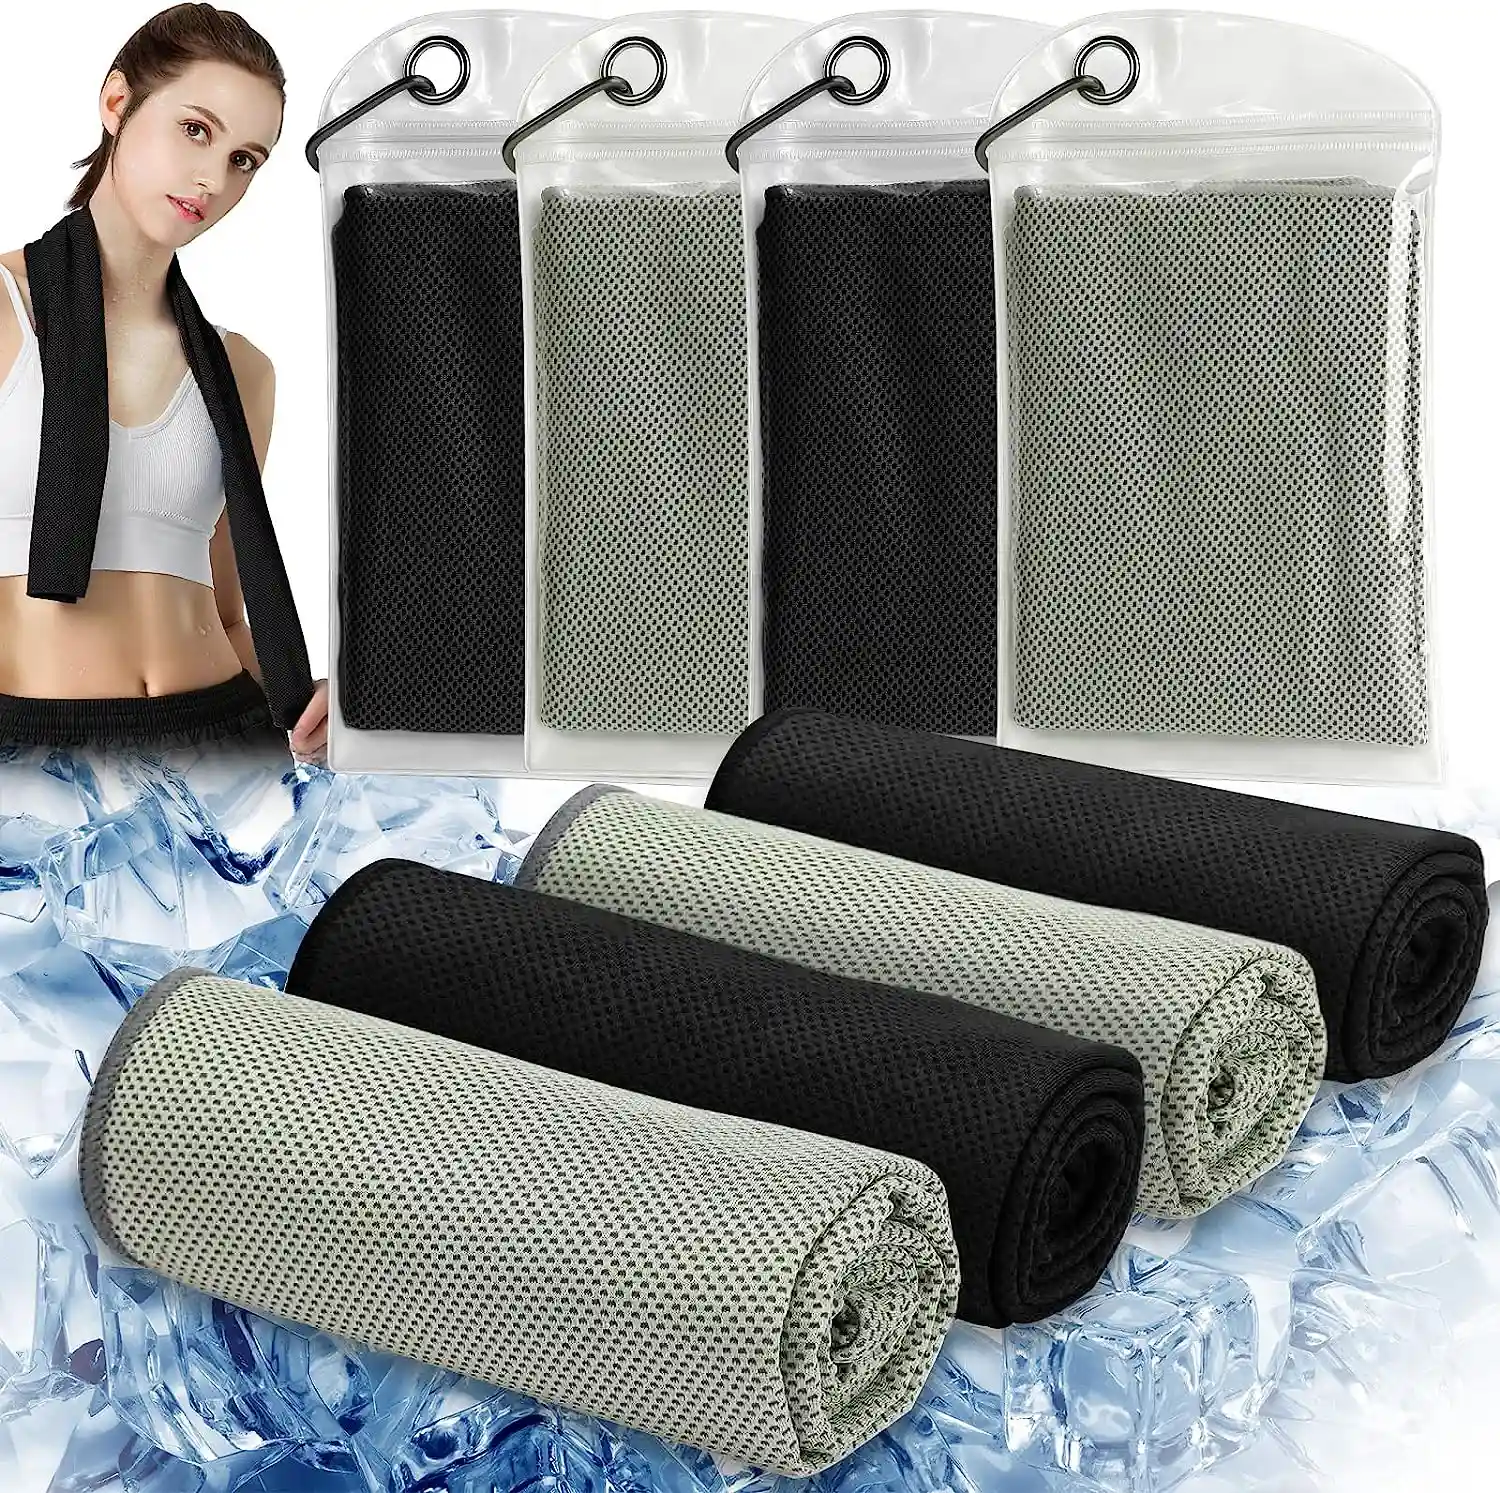 4 Pack Cooling Towel Chilly Microfiber Towel